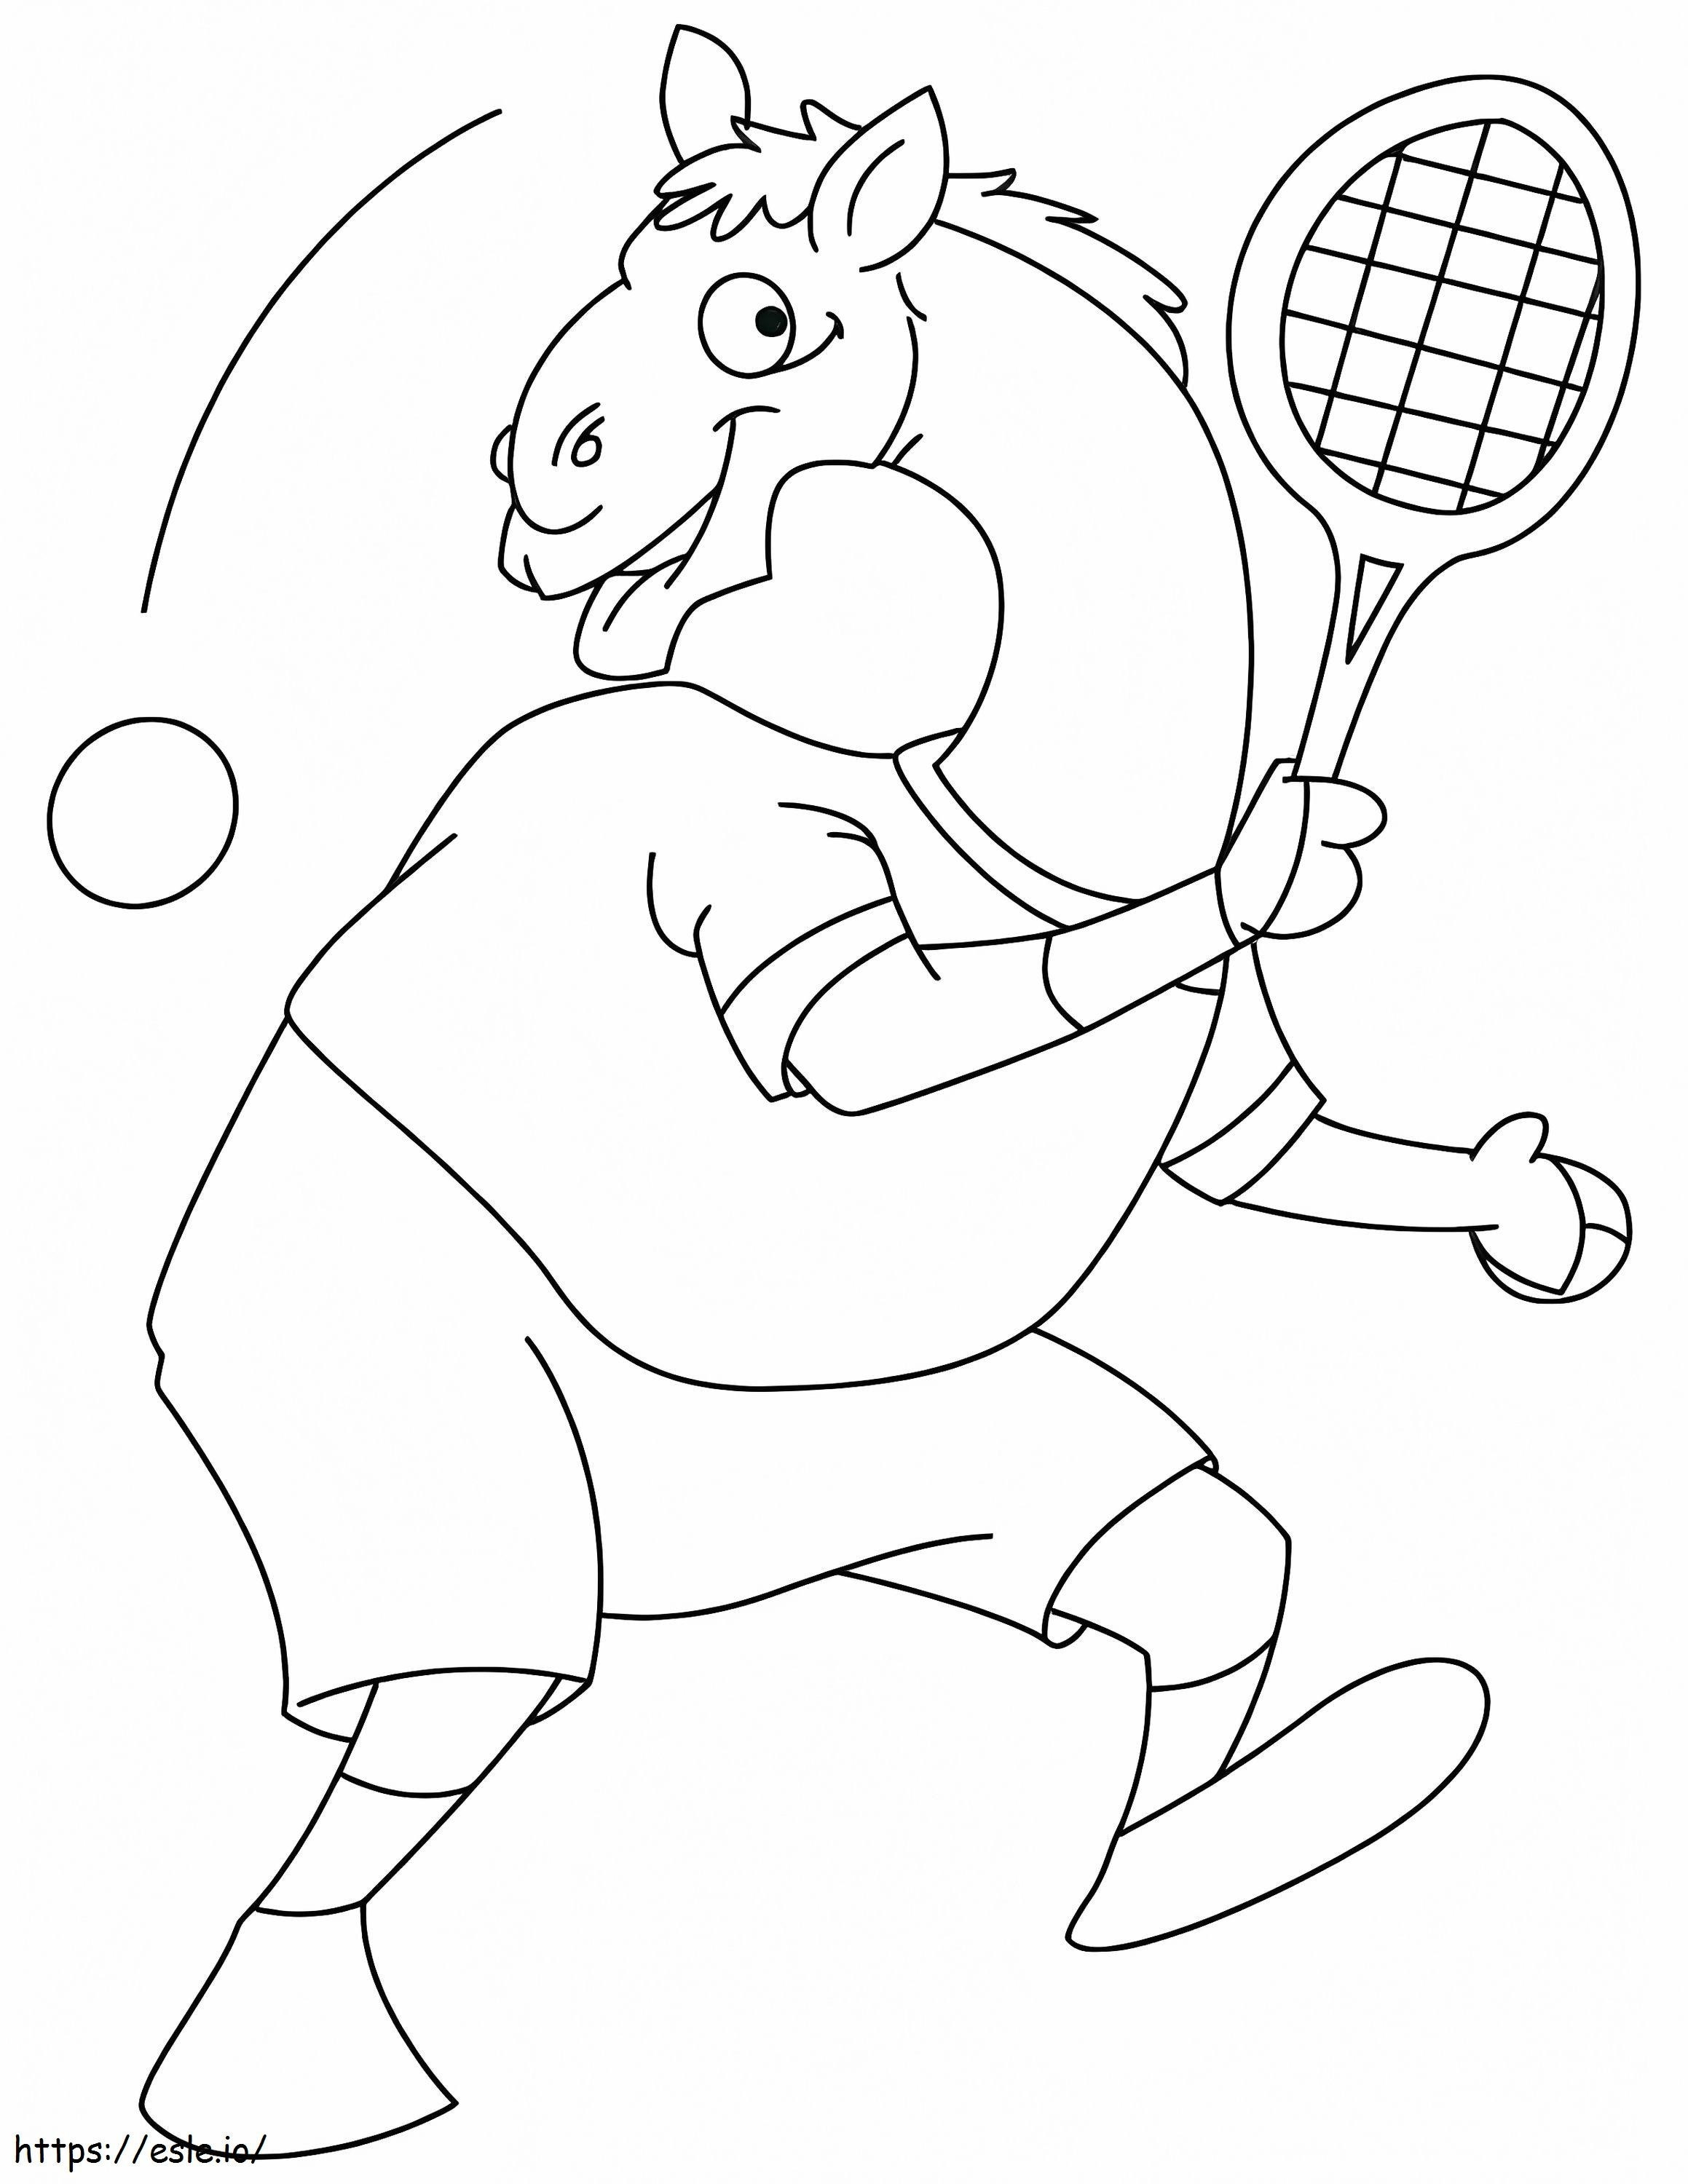 Camel Play Tennis coloring page